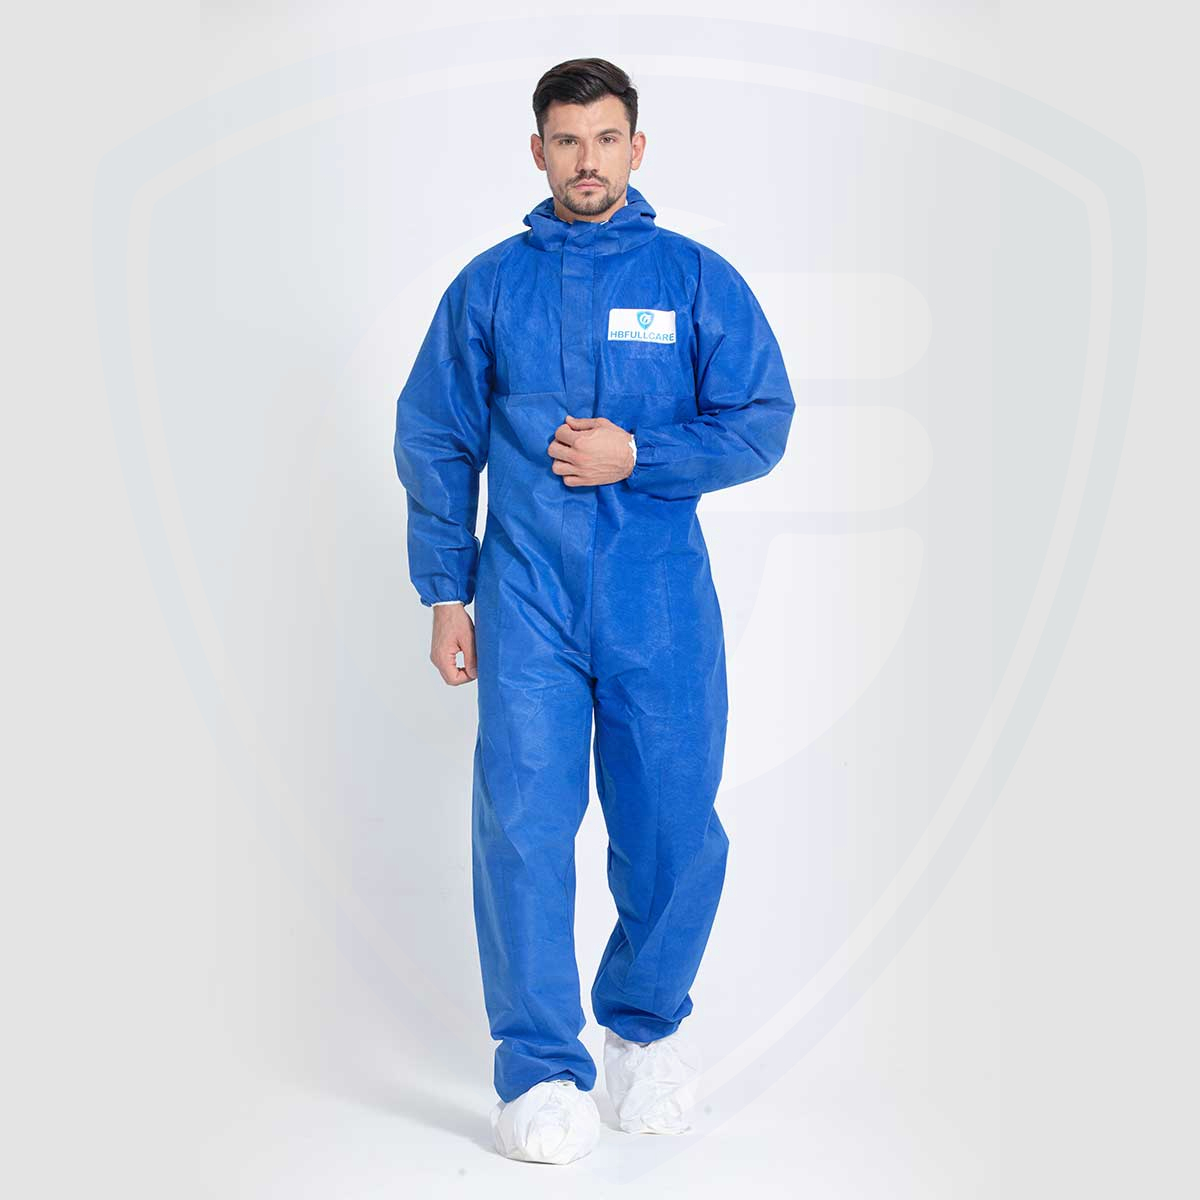 FC2030 Cat.III EN1073 EN1149 Blue High Quality Disposable Protective Coverall 